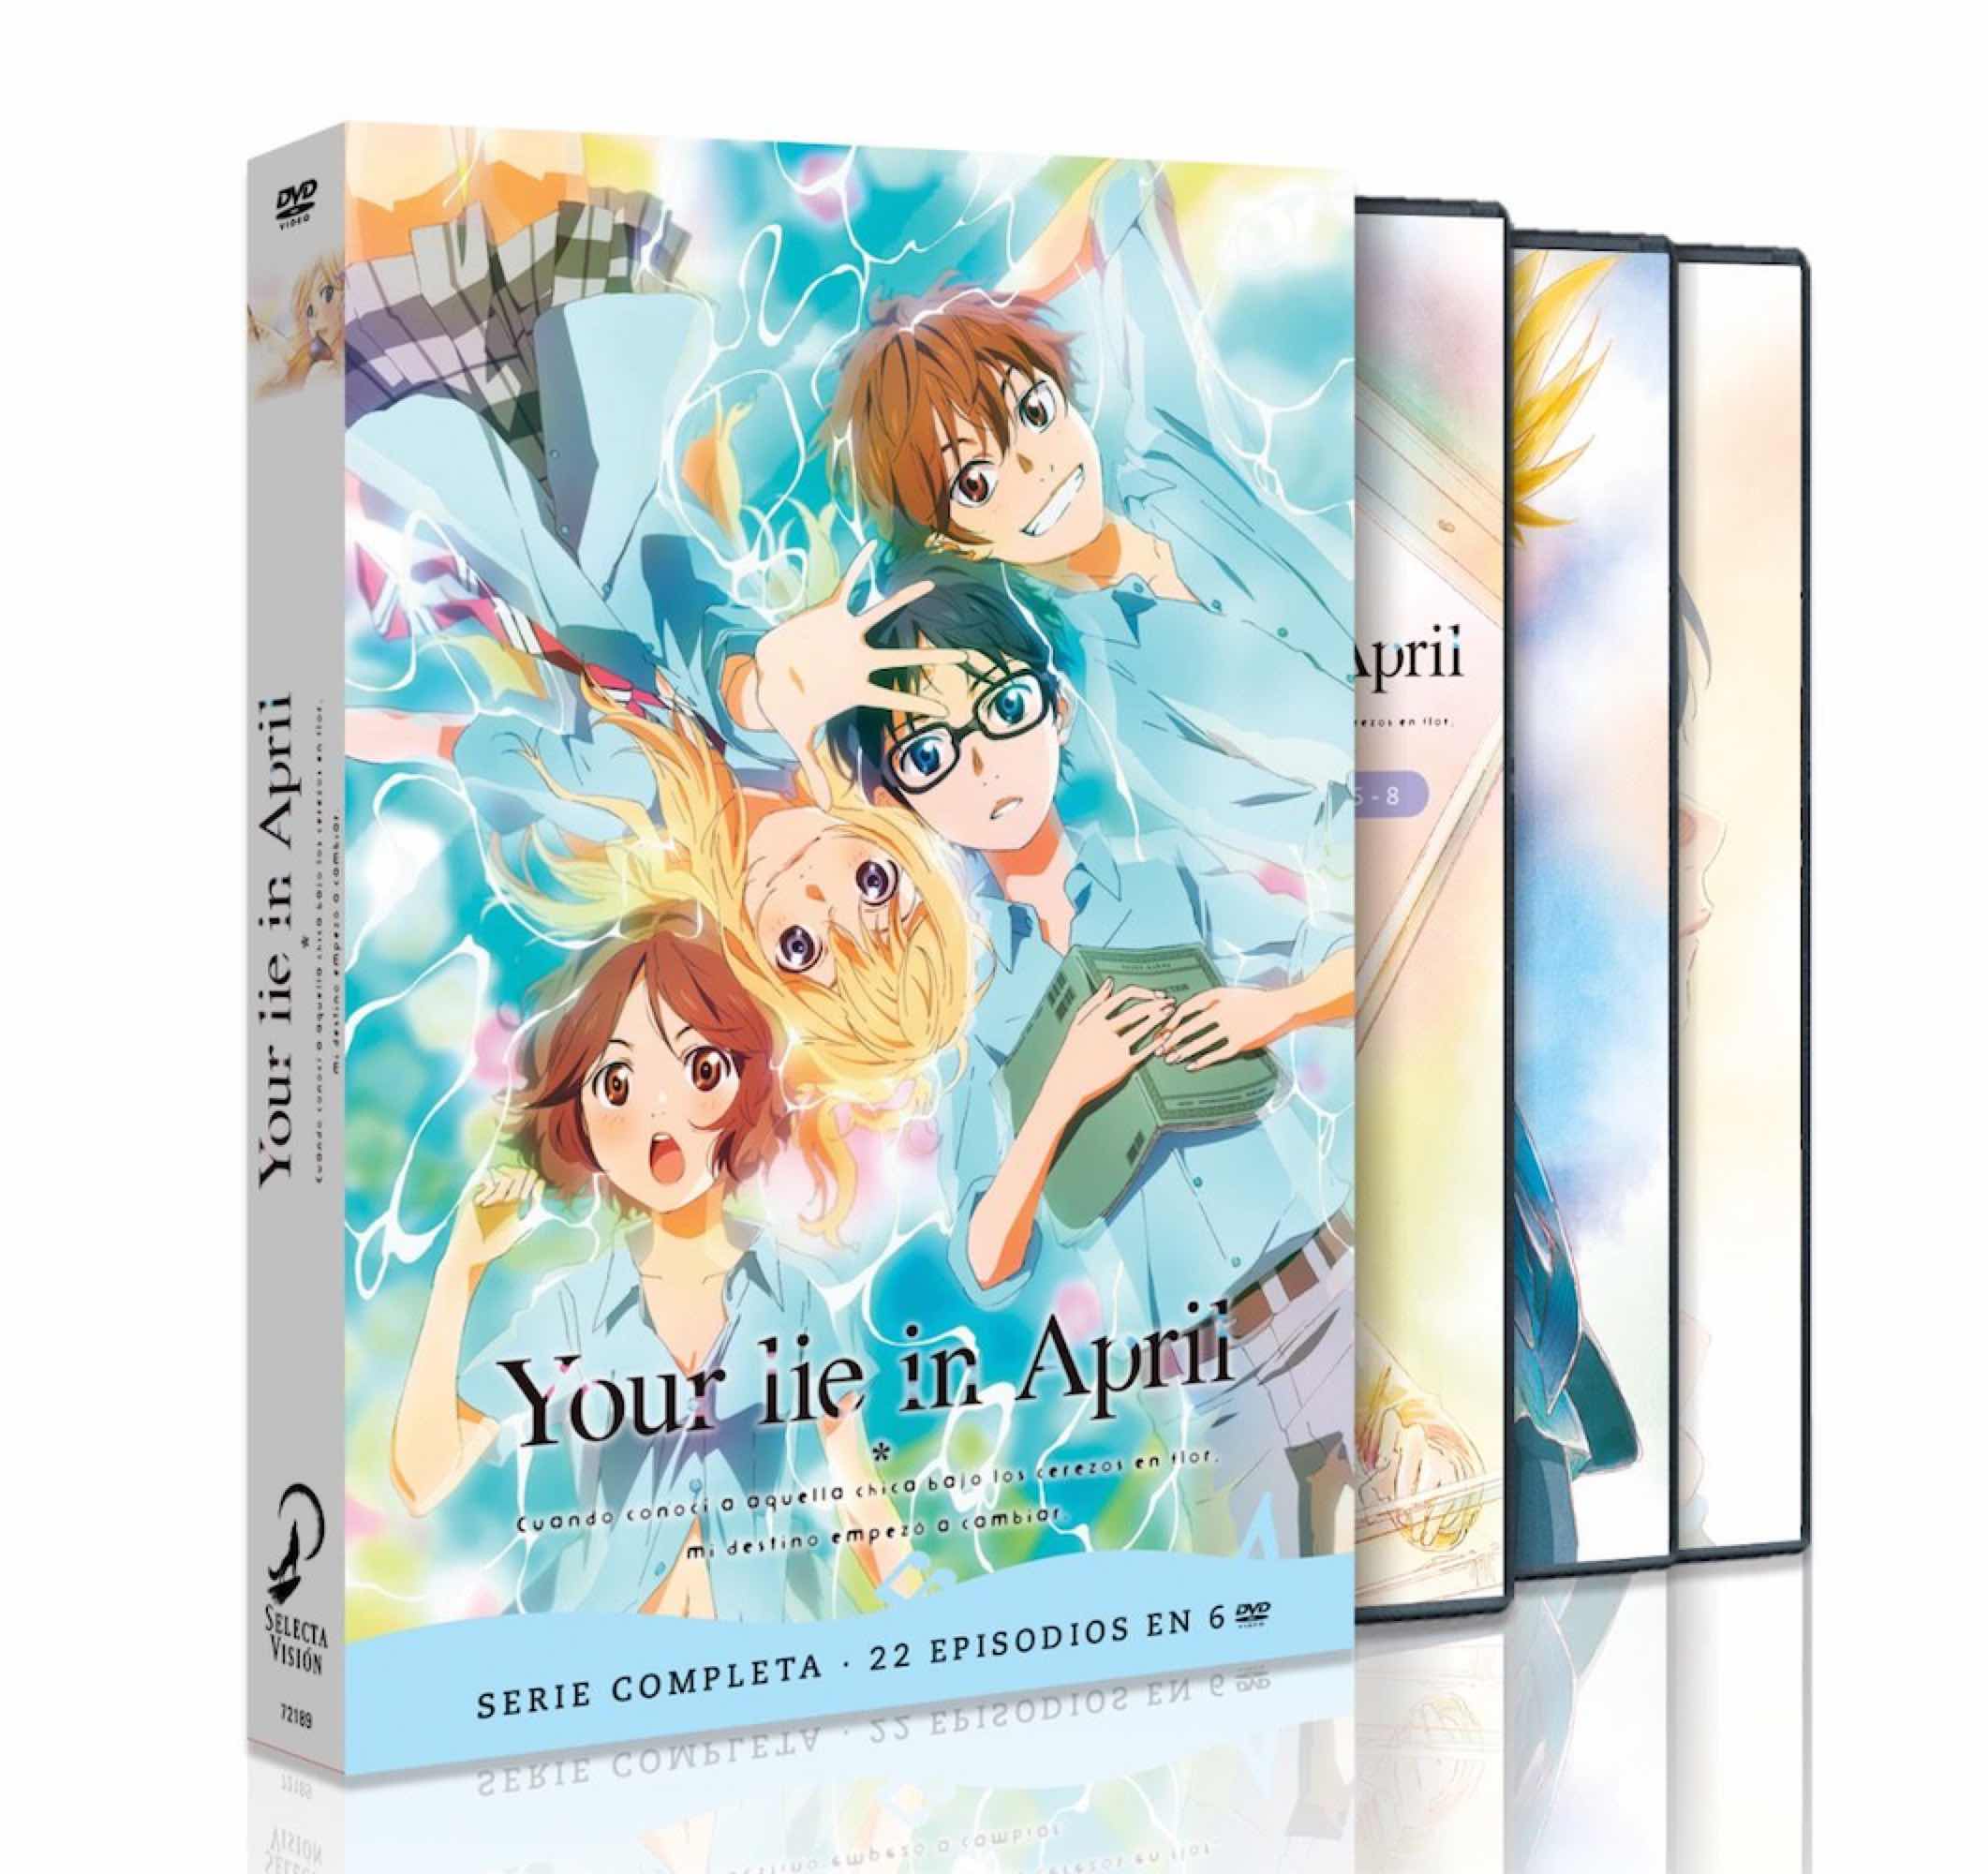 DVD YOUR LIE IN APRIL SERIE COMPLETA